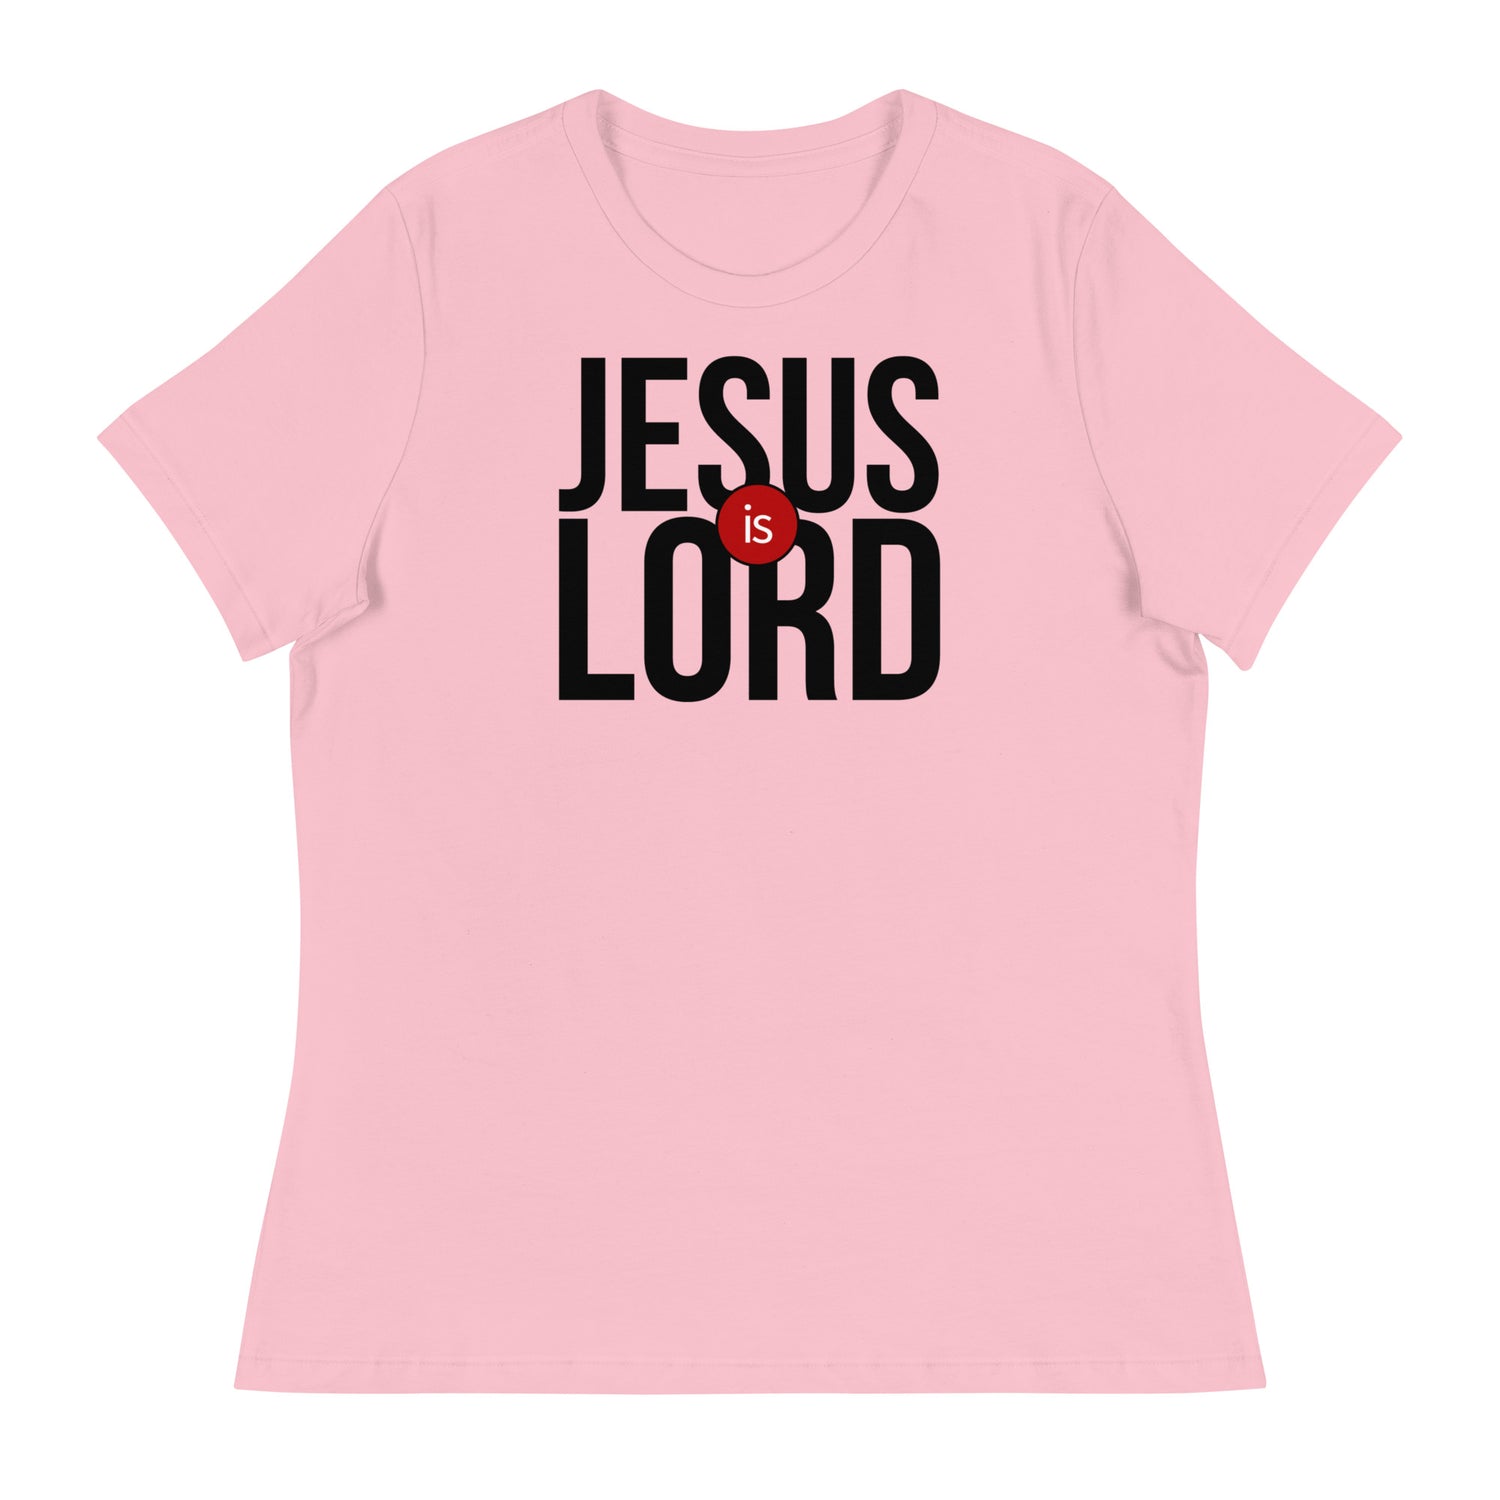 JESUS IS LORD WOMENS FRONT AND BACK T-SHIRT